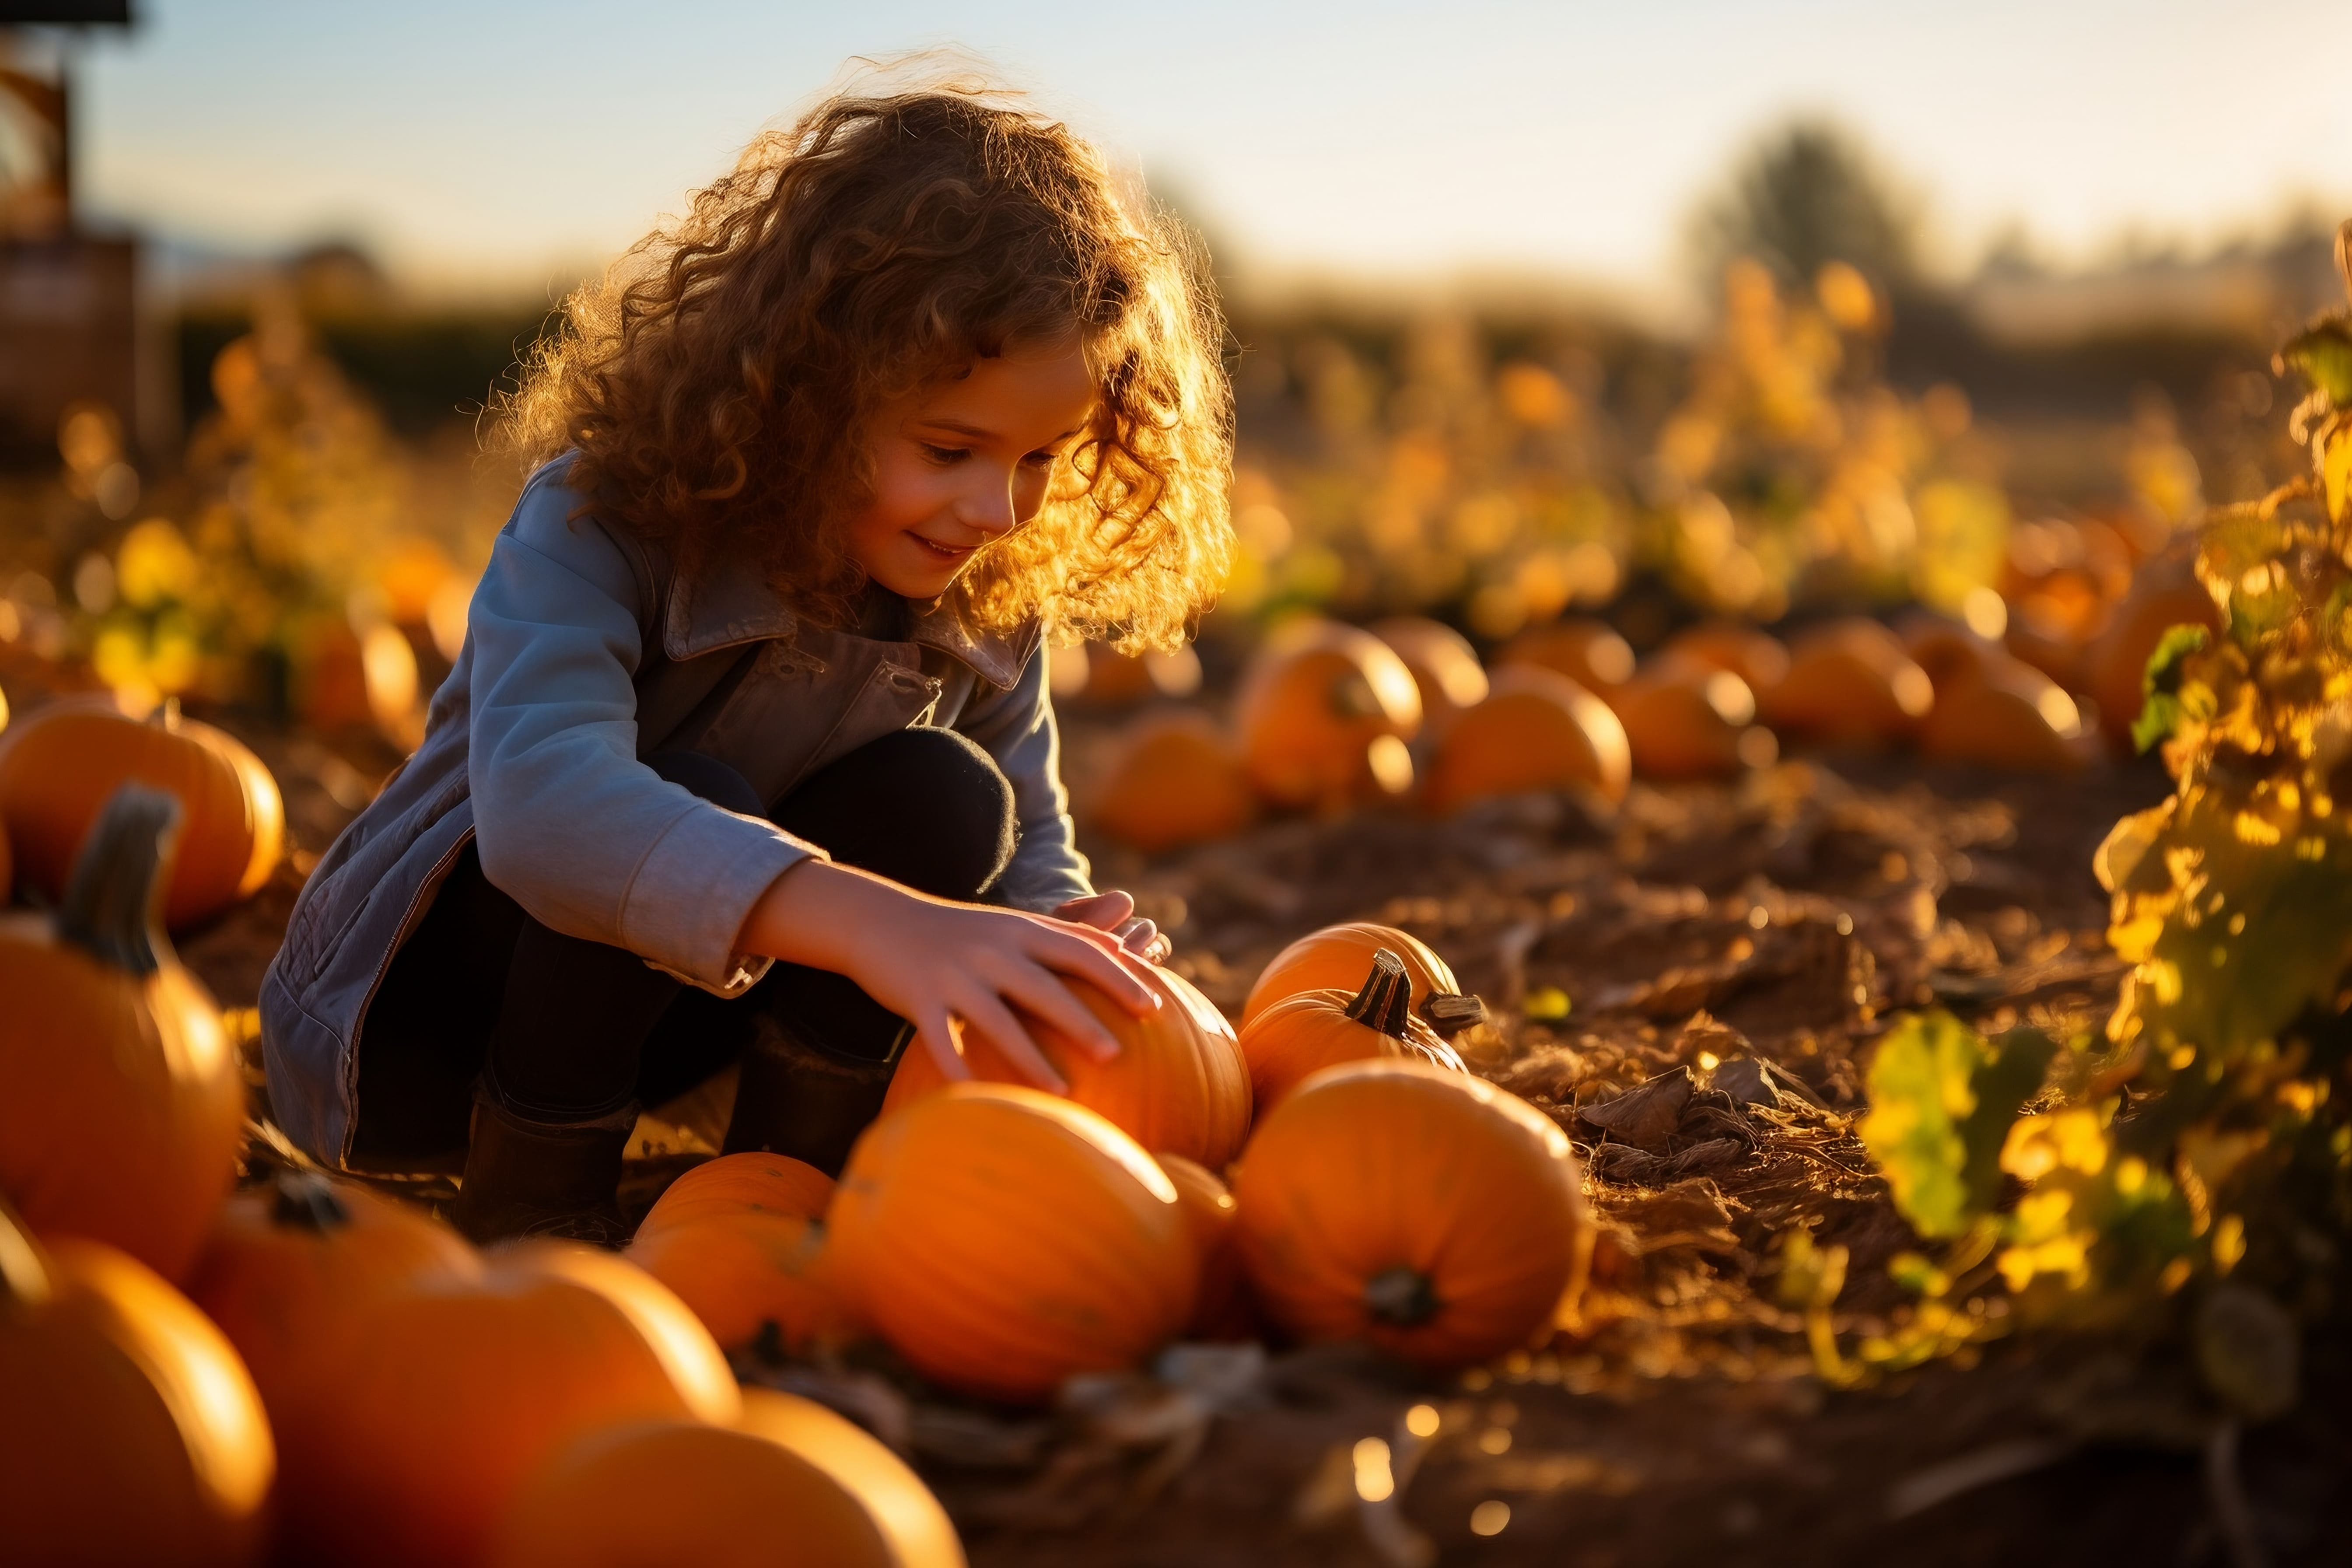 A little girl smiling as she chooses a pumpkin from the field full of them